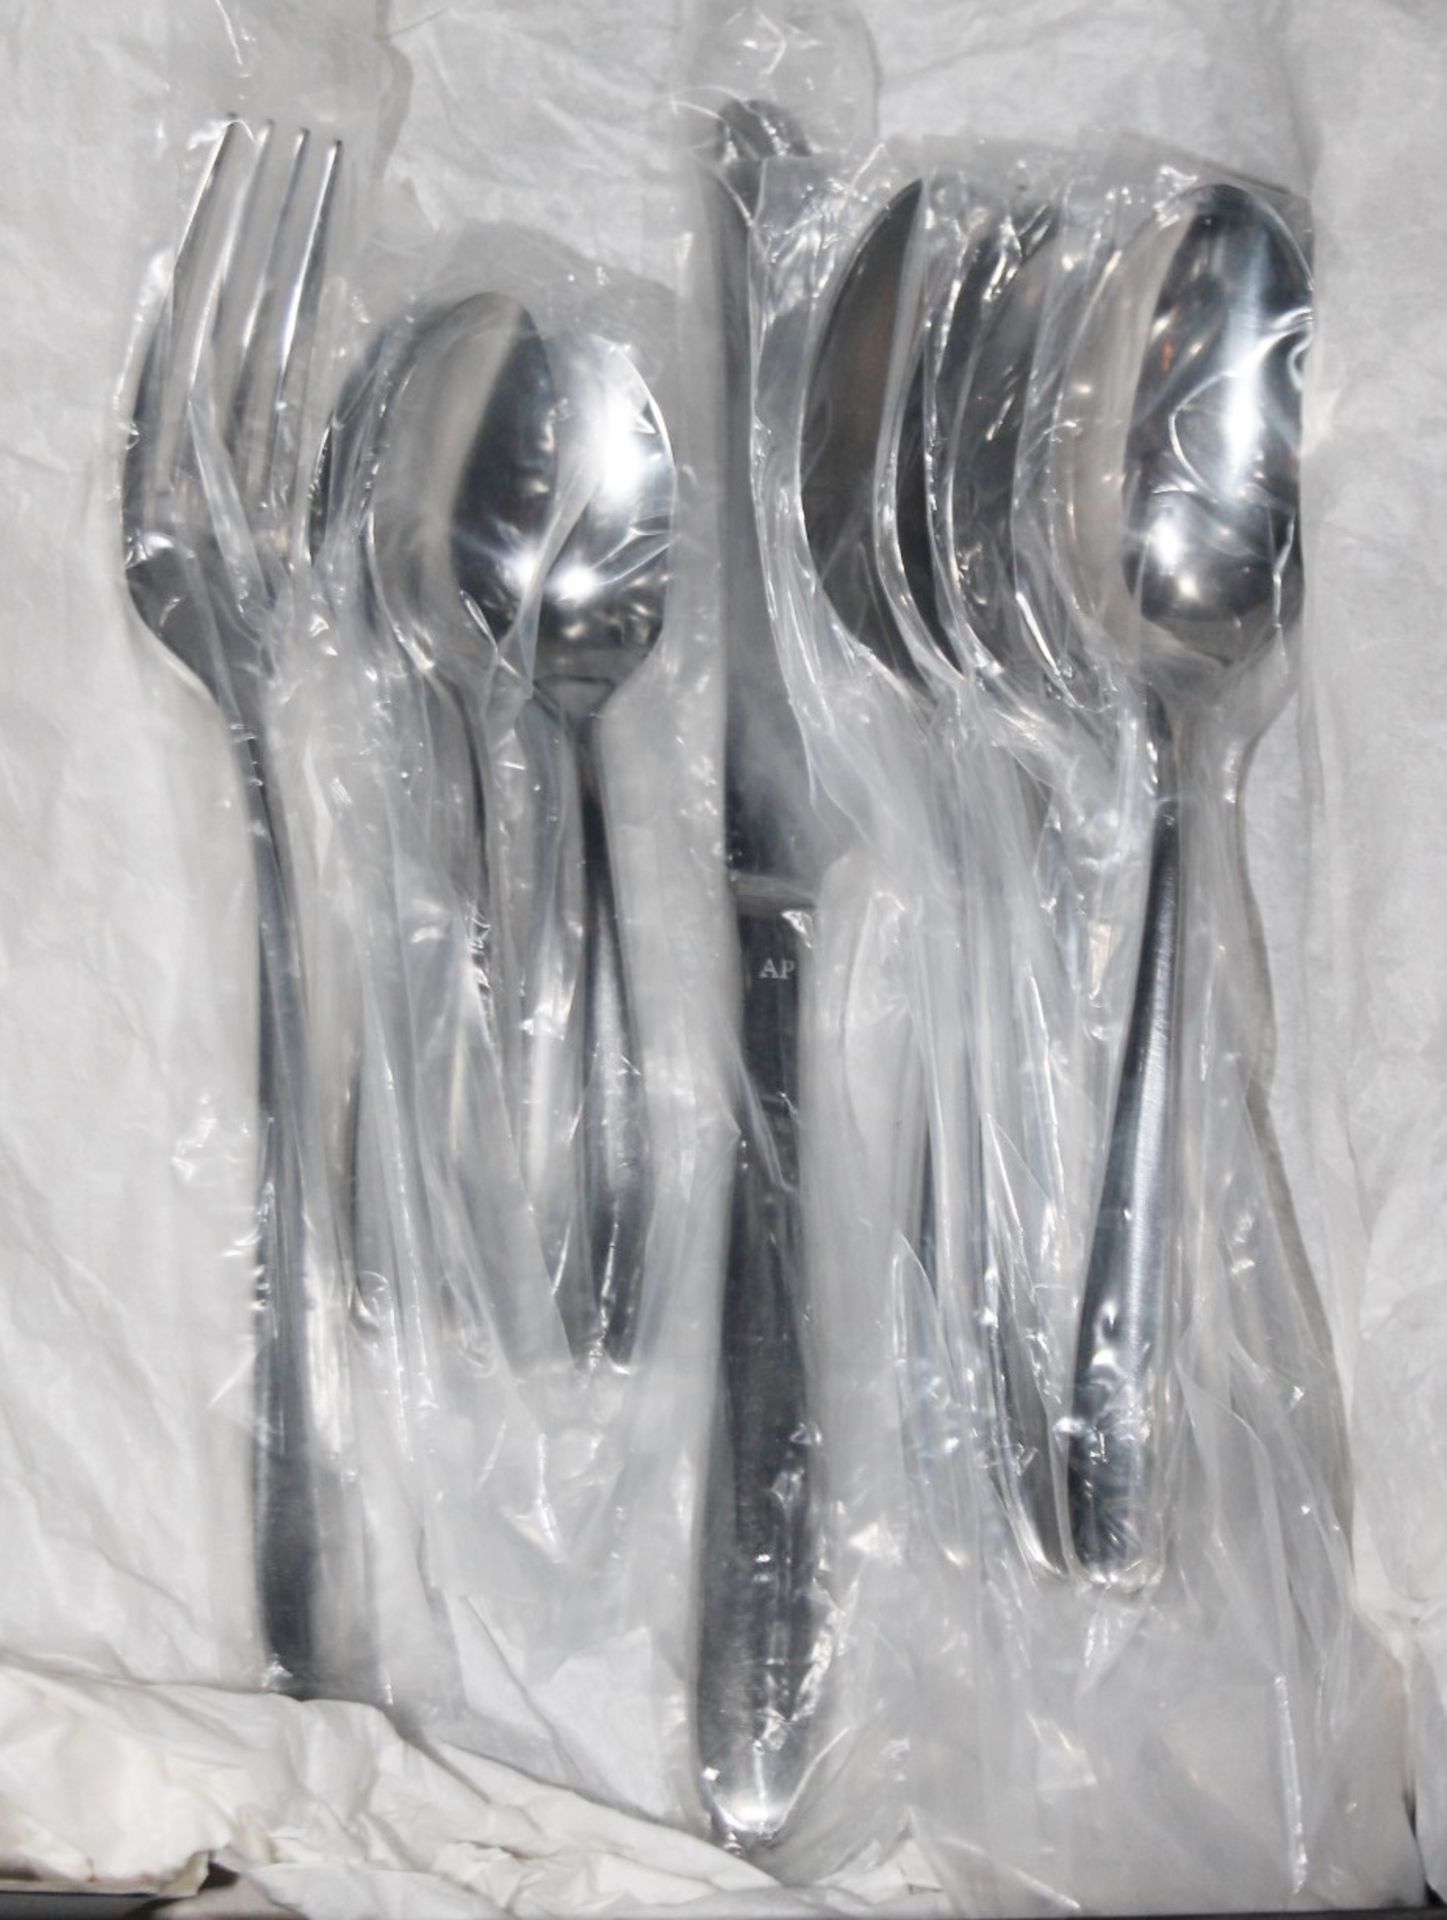 15 x Pieces Of ARTHUR PRICE Stainless Steel Cutlery - Unused Boxed Stock - Ref: HHW328/NOV21/WH2/ - Image 3 of 4